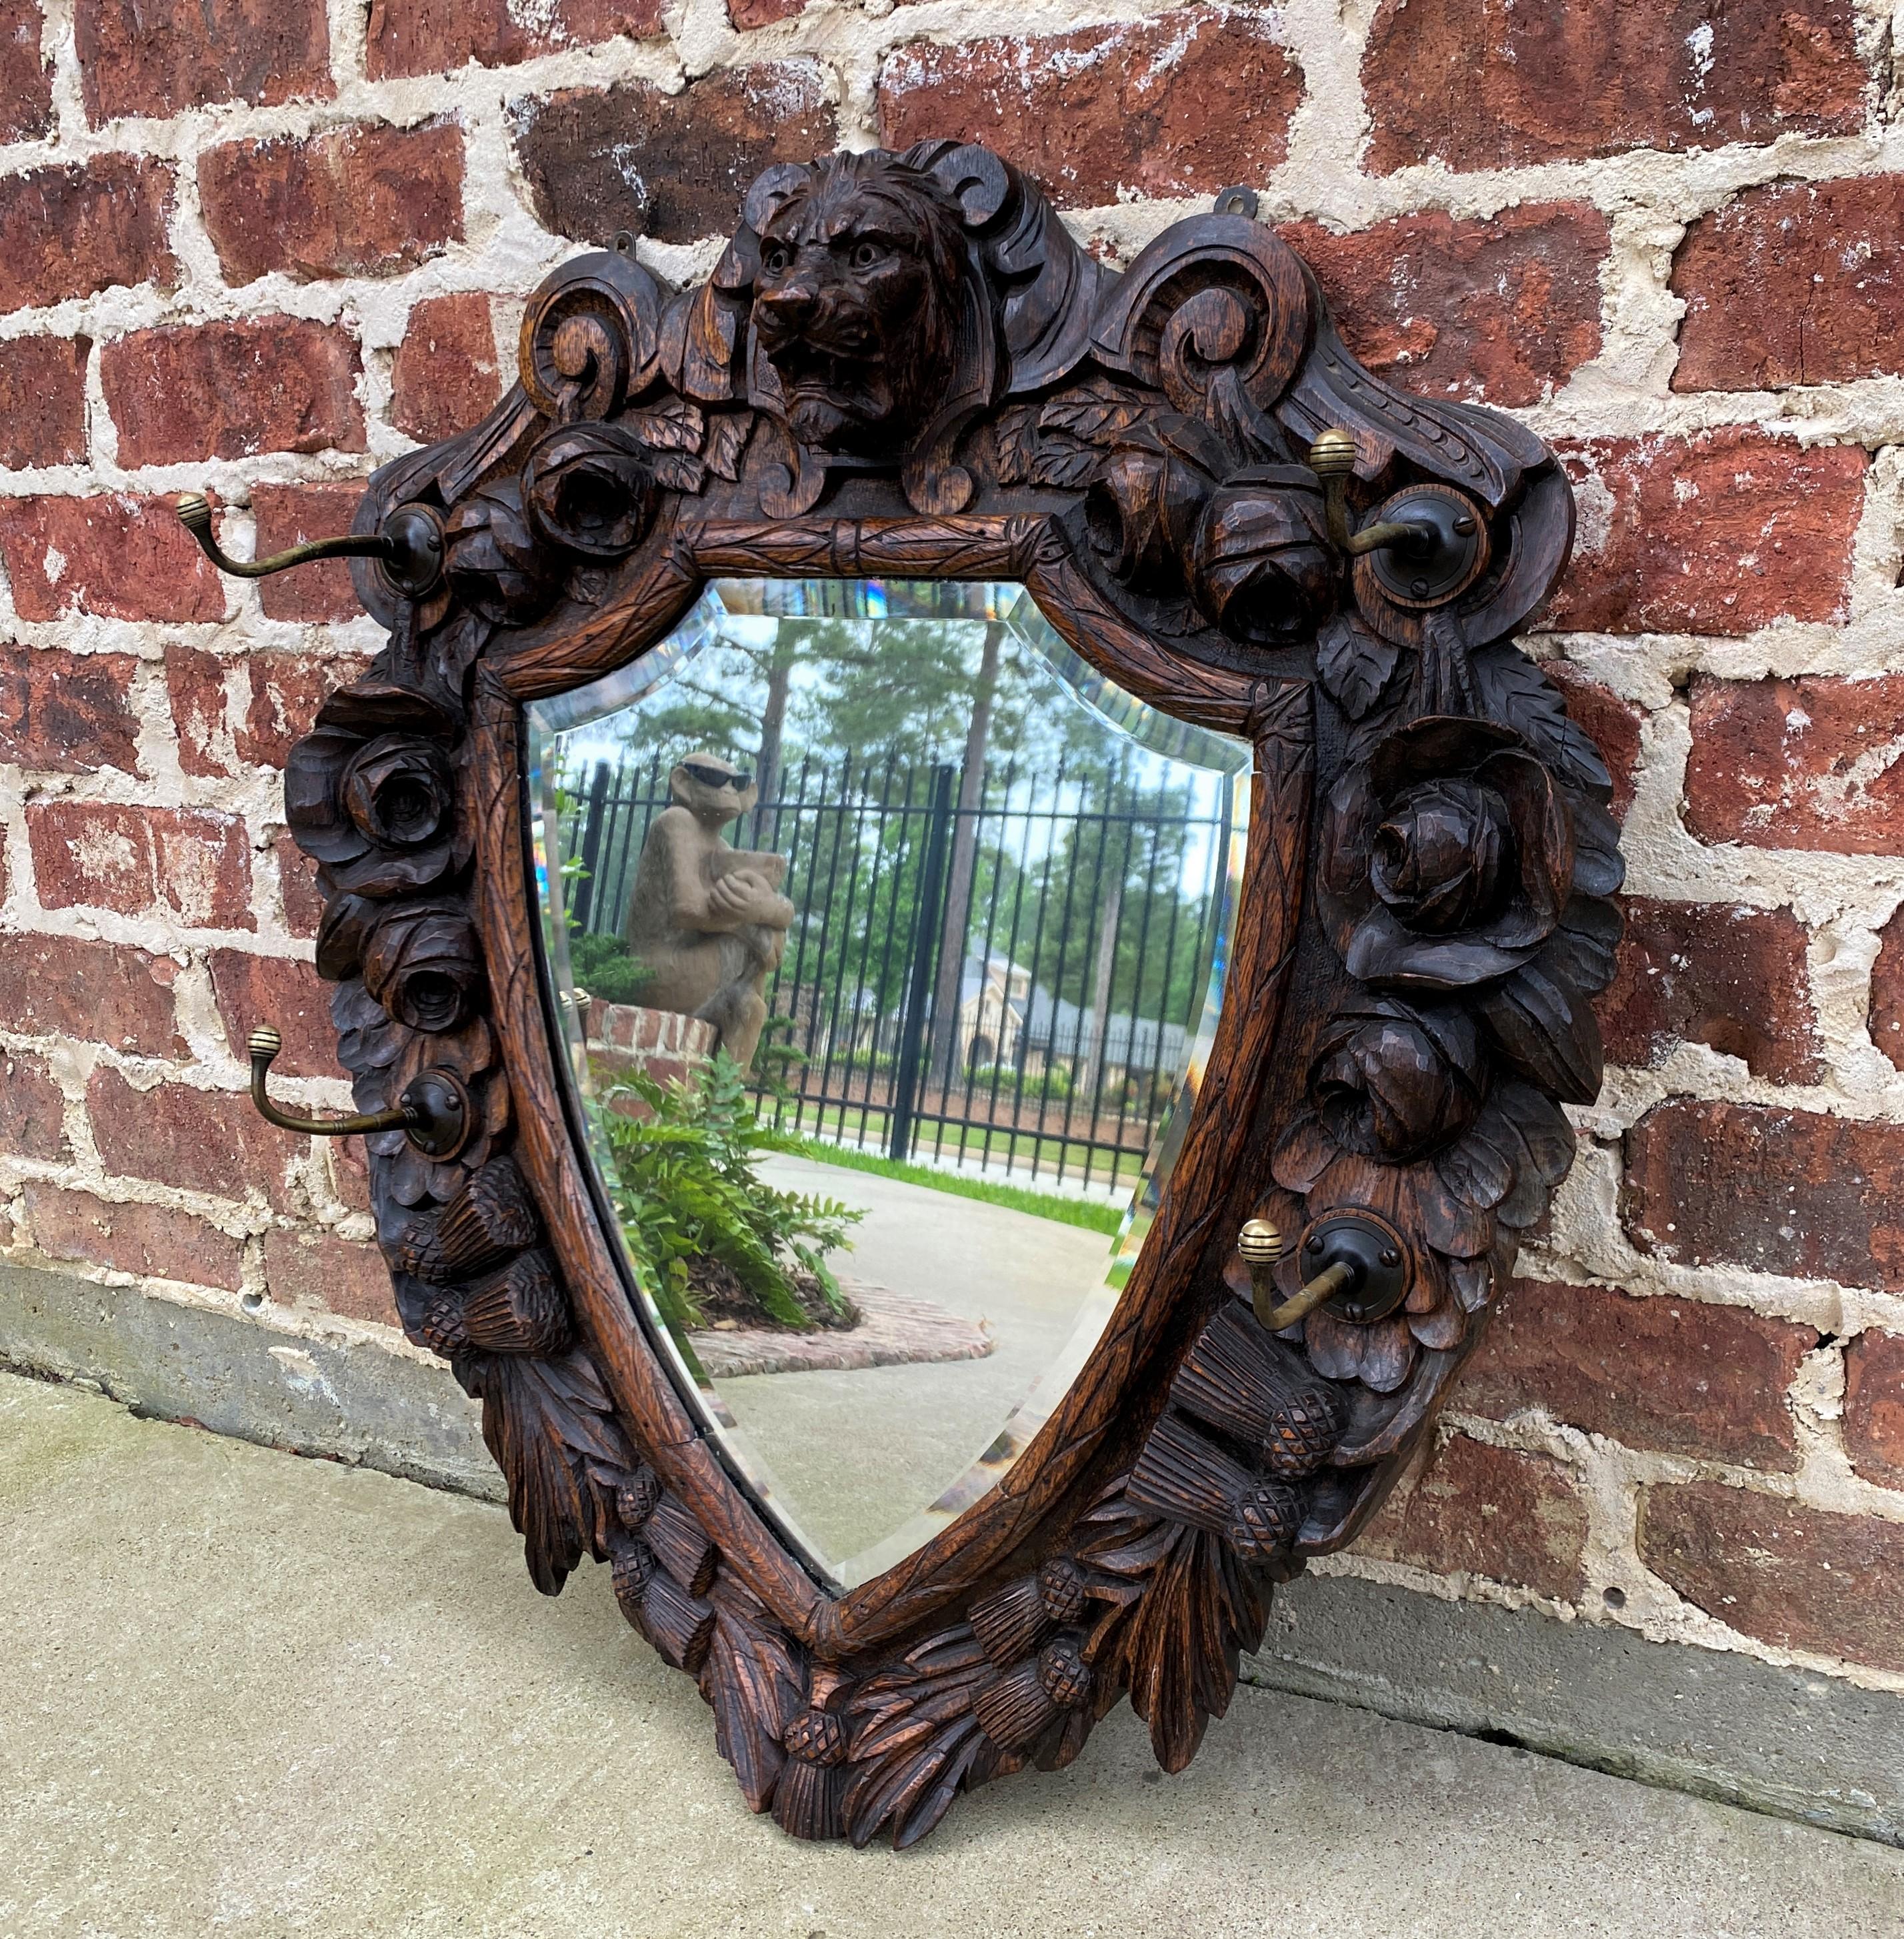 BEAUTIFUL & UNIQUE Antique English Oak Renaissance Revival Shield Shaped Framed Wall Mirror with Lions Mask and Hooks~~c. 1900
 
Popular Renaissance Revival English framed oak mirror with carved lions mask, roses and tassels~~unique shield shape